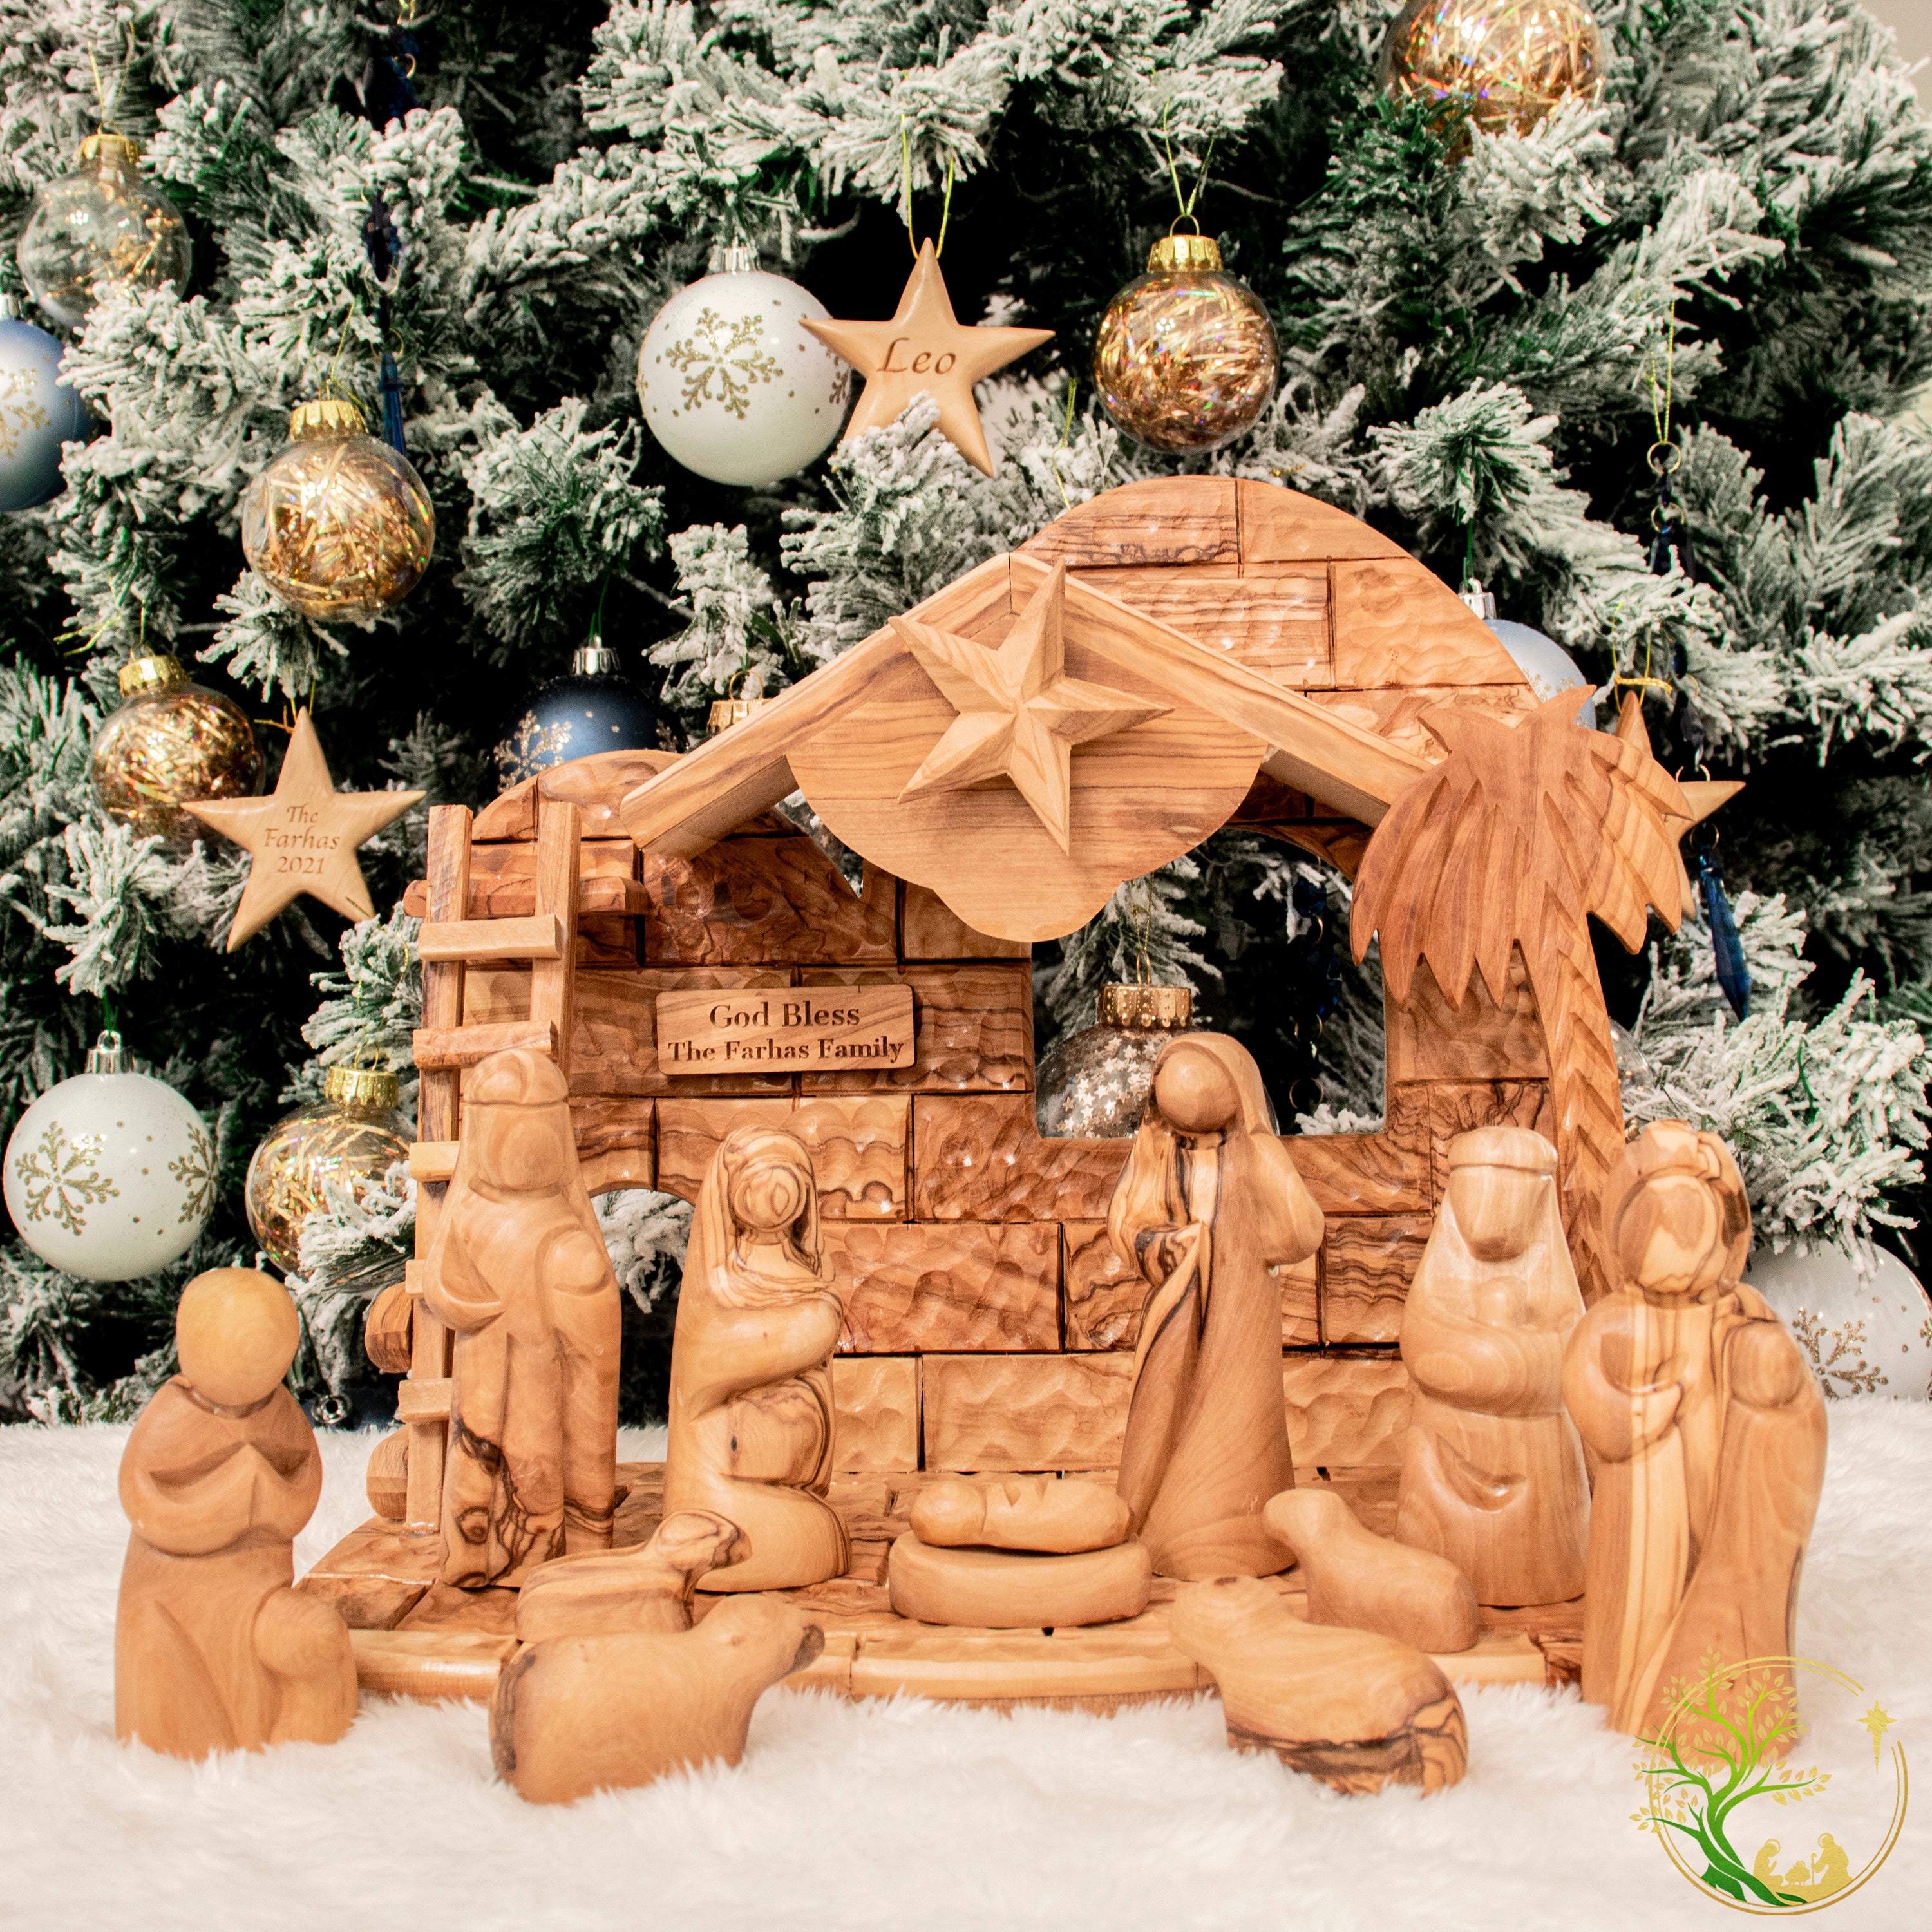 Olive Wood Statues & Figures HandiCrafts from Bethlehem Holy Land – Zuluf